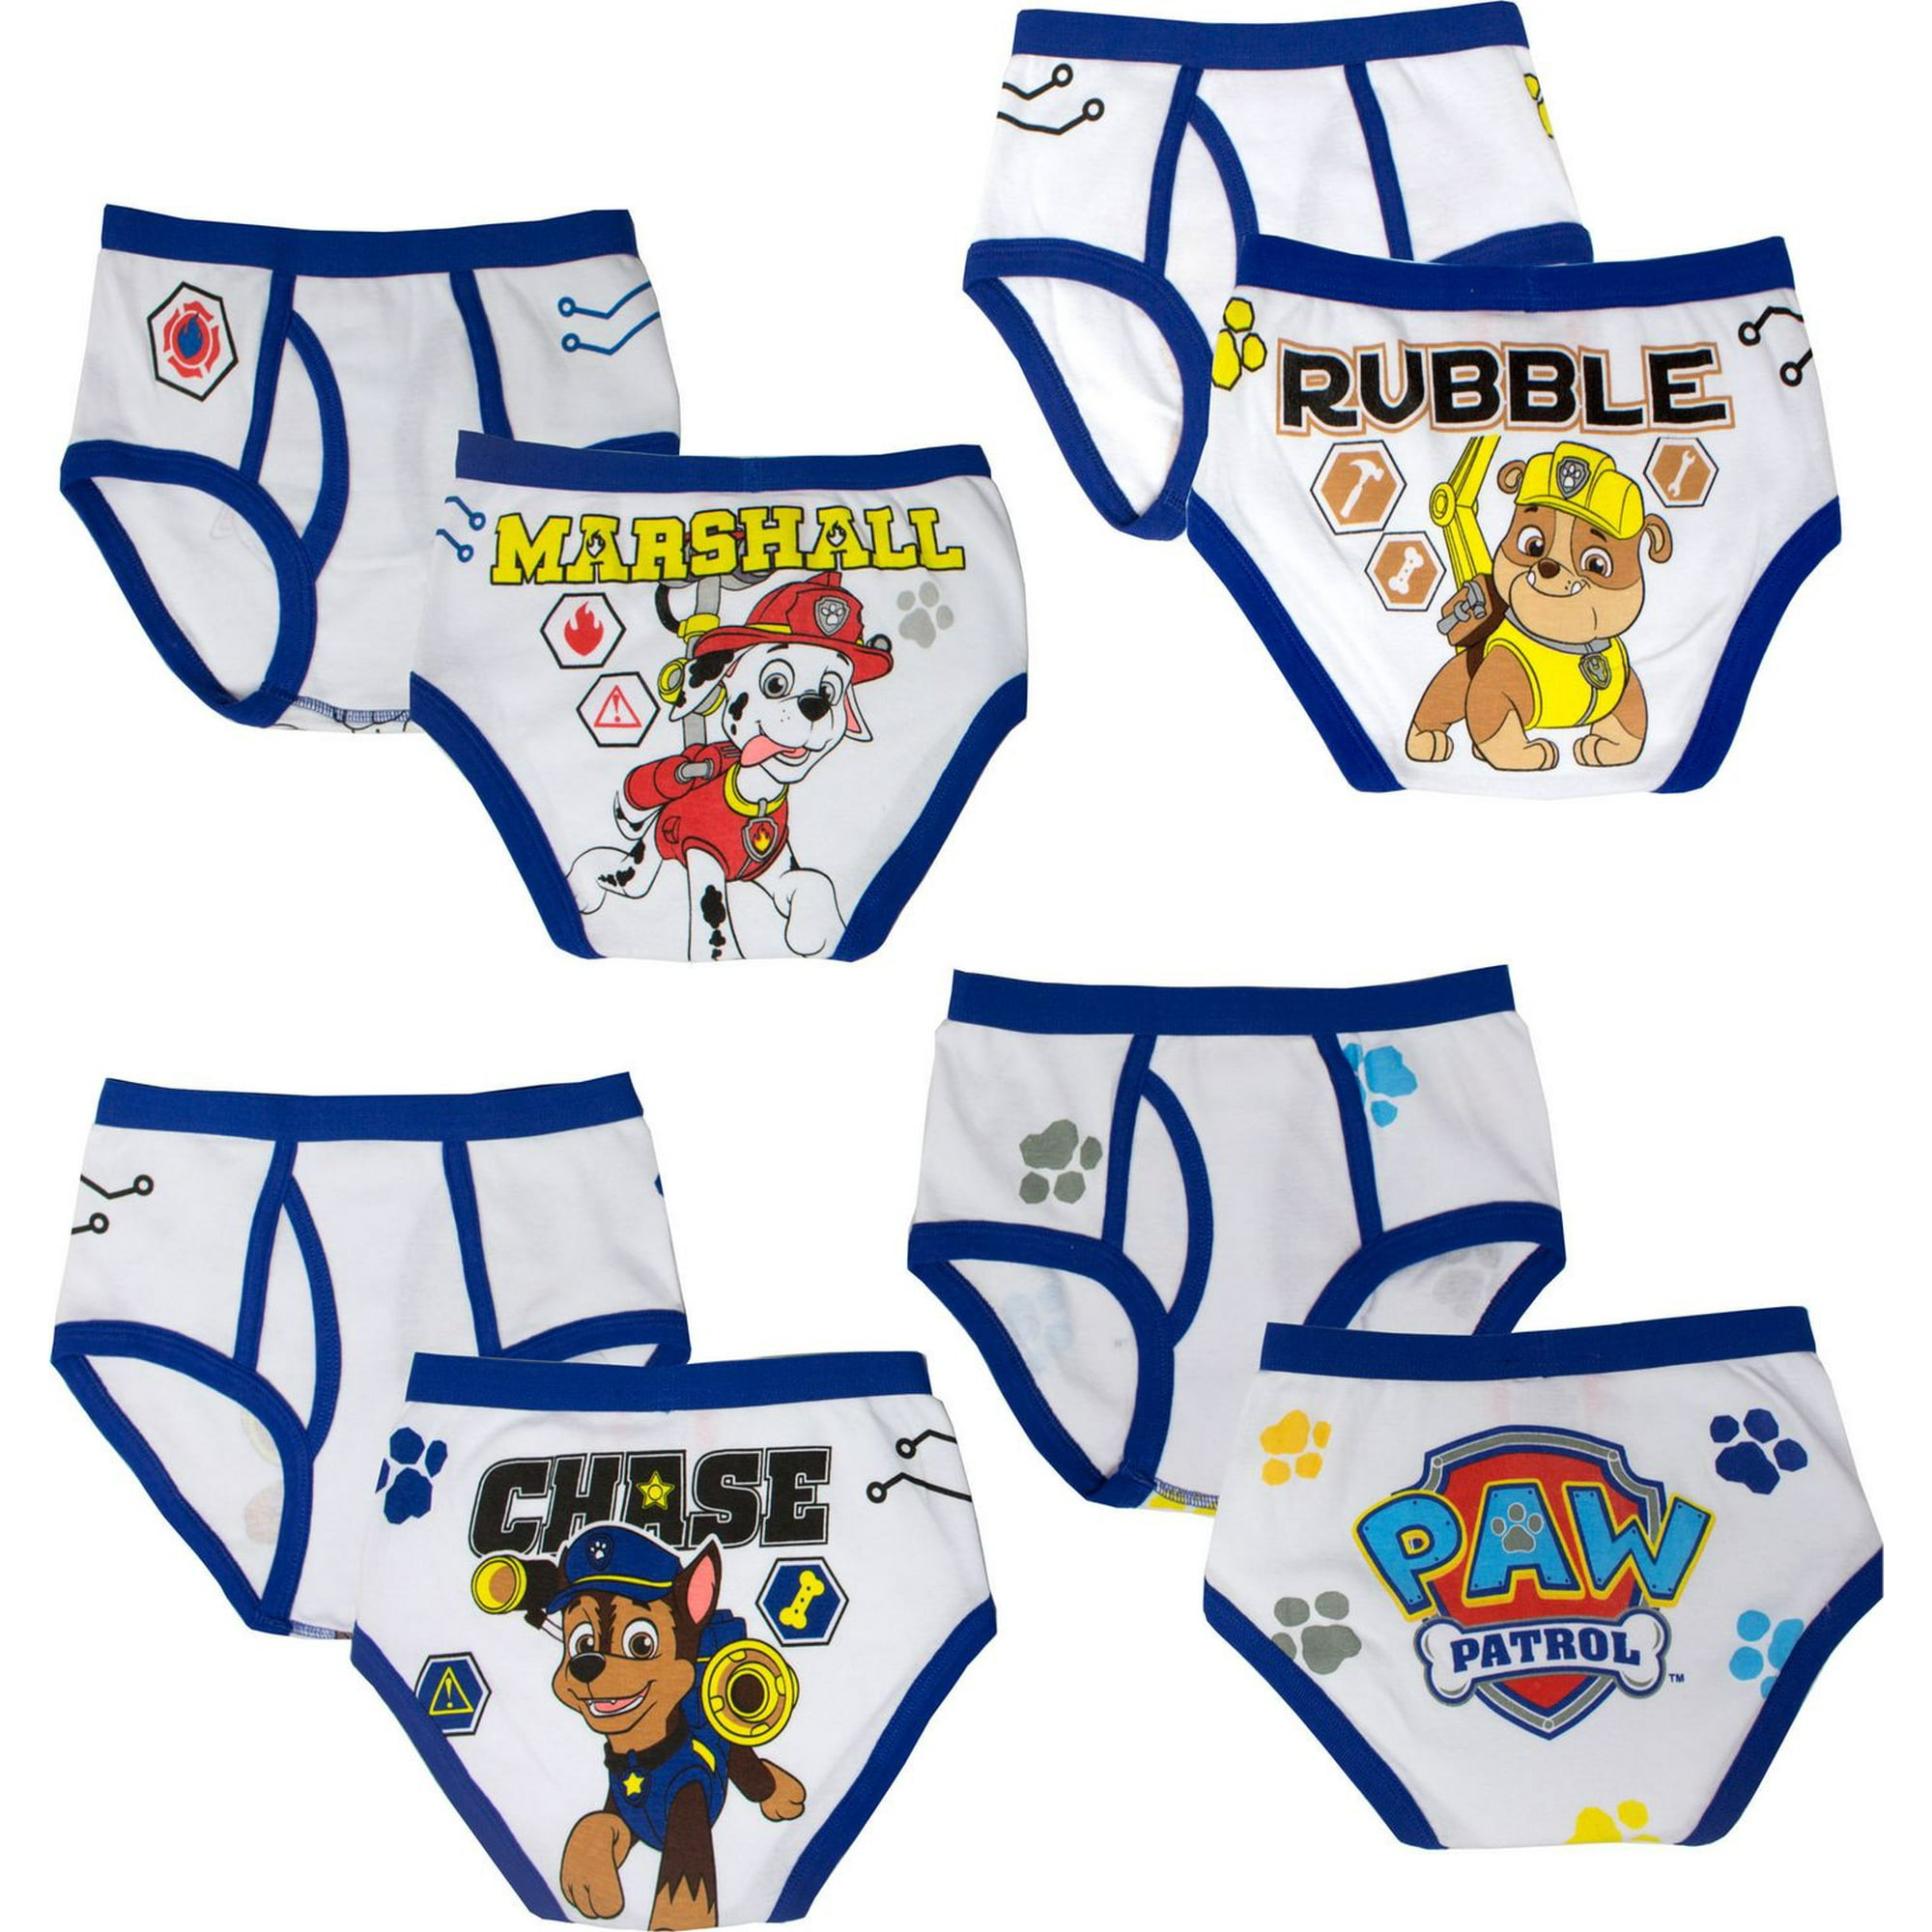 PAW PATROL Boys 100% Combed Cotton Toddler 7 Or 10-pk Briefs